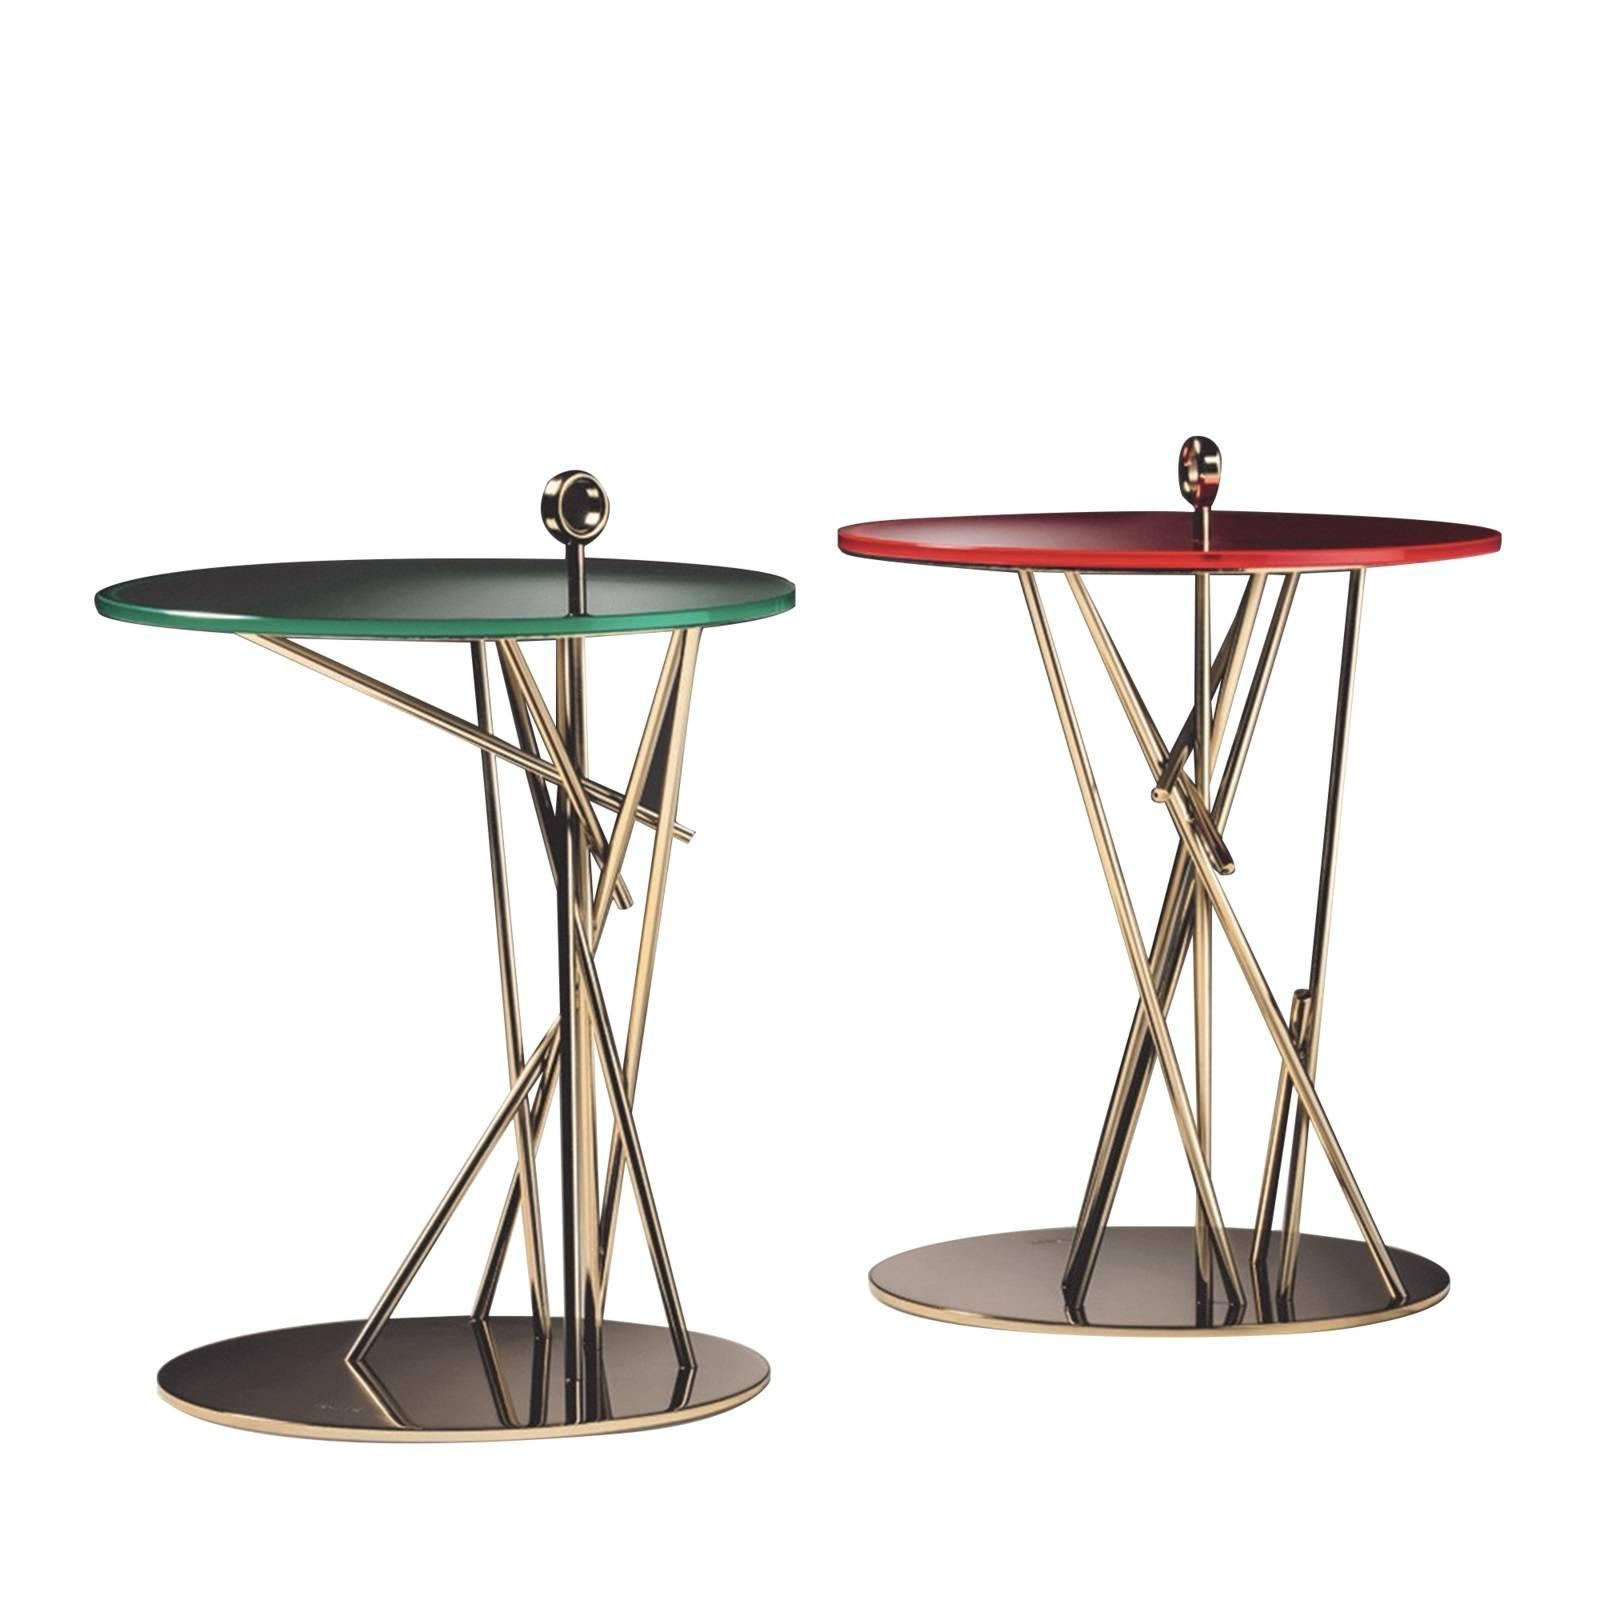 Inspired by Tao, the essence behind the natural world that keeps the universe balanced and ordered, this table is a highly decorative piece that will bring contemporary flair to any living space in the home. The striking body is composed of